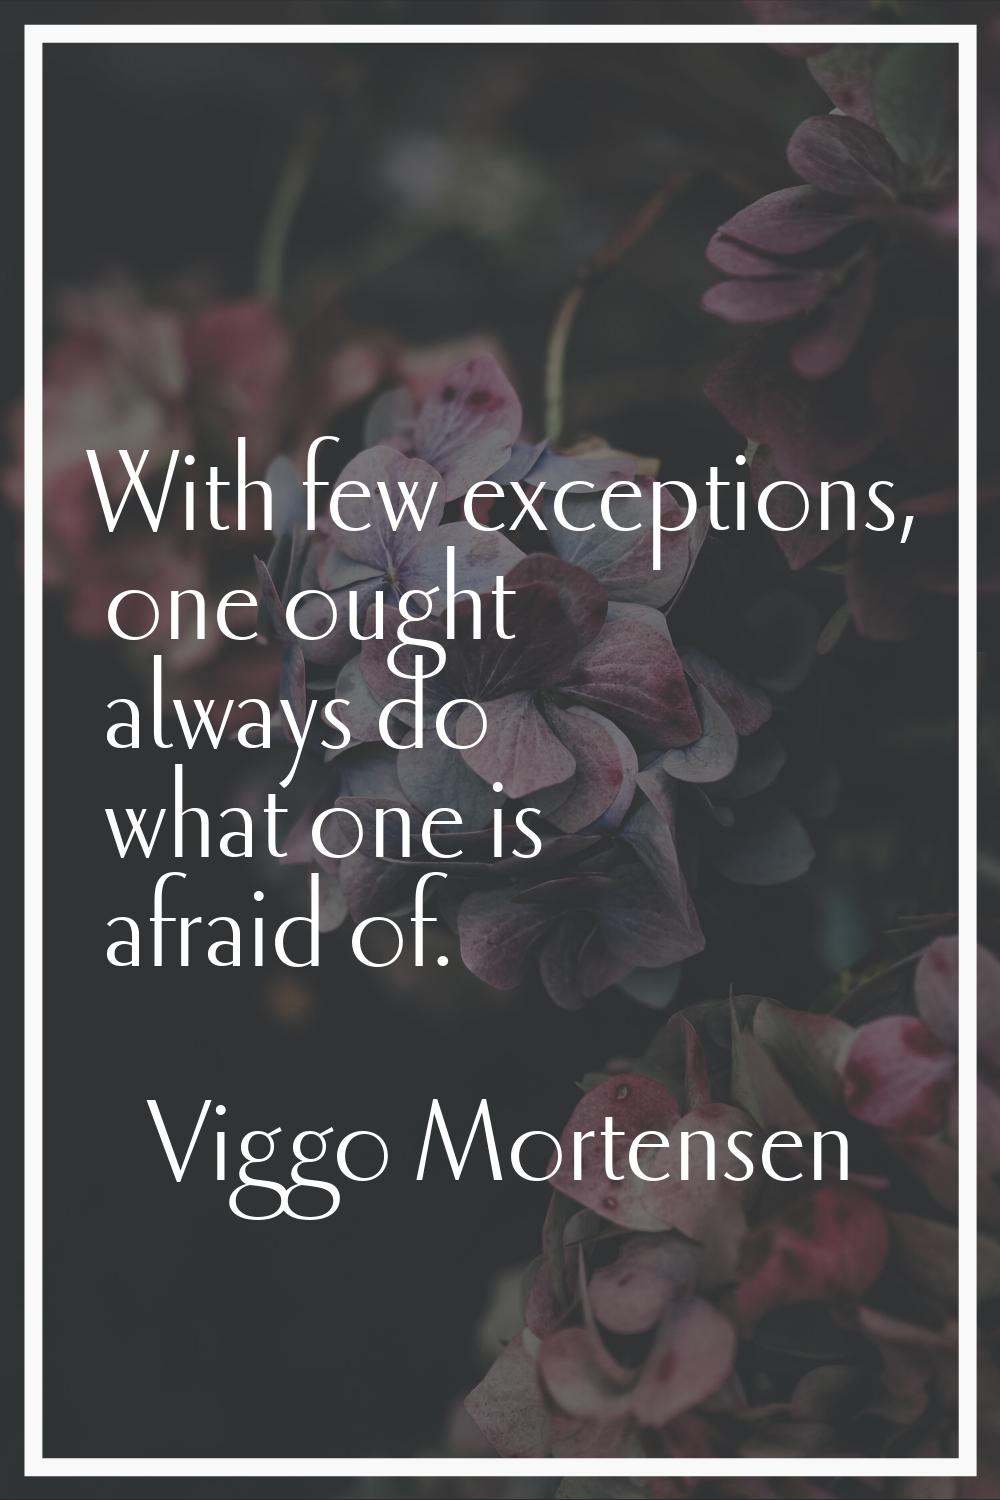 With few exceptions, one ought always do what one is afraid of.